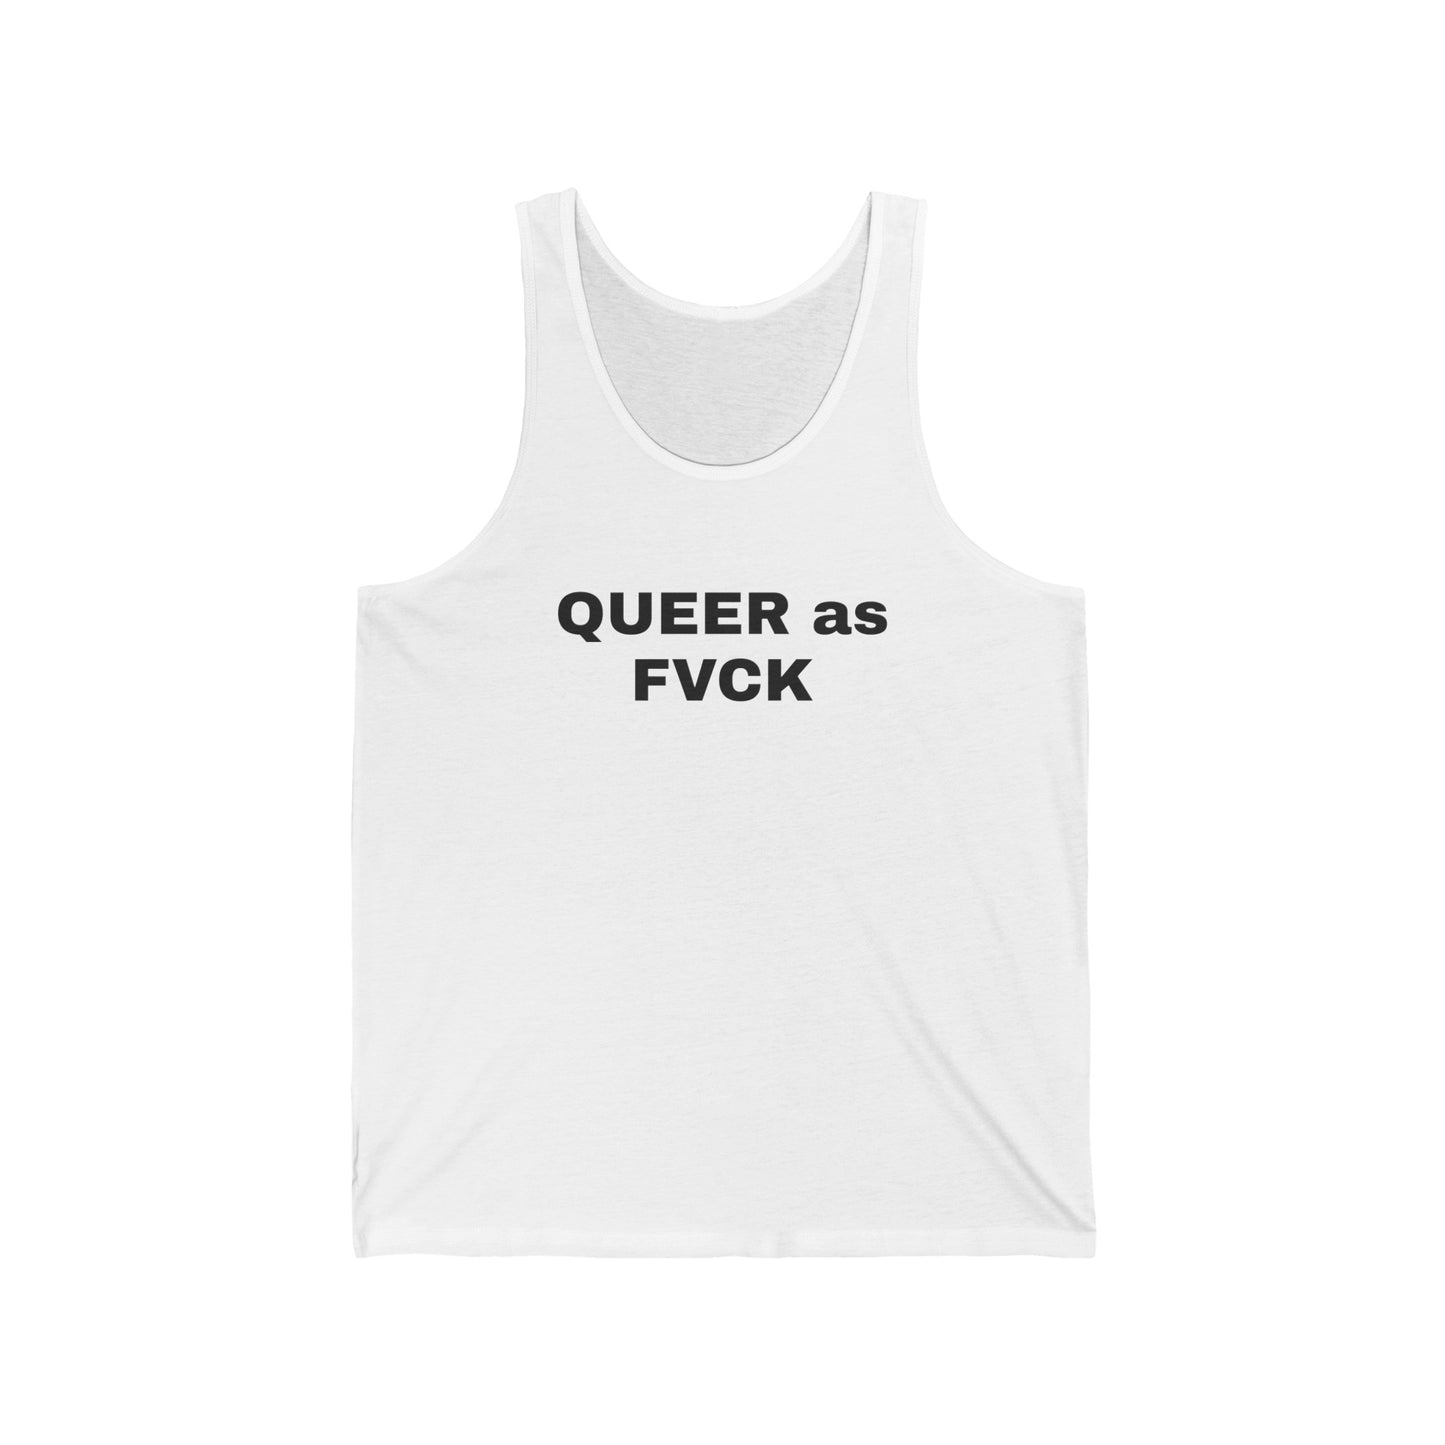 QUEER as FVCK Unisex Jersey Tank